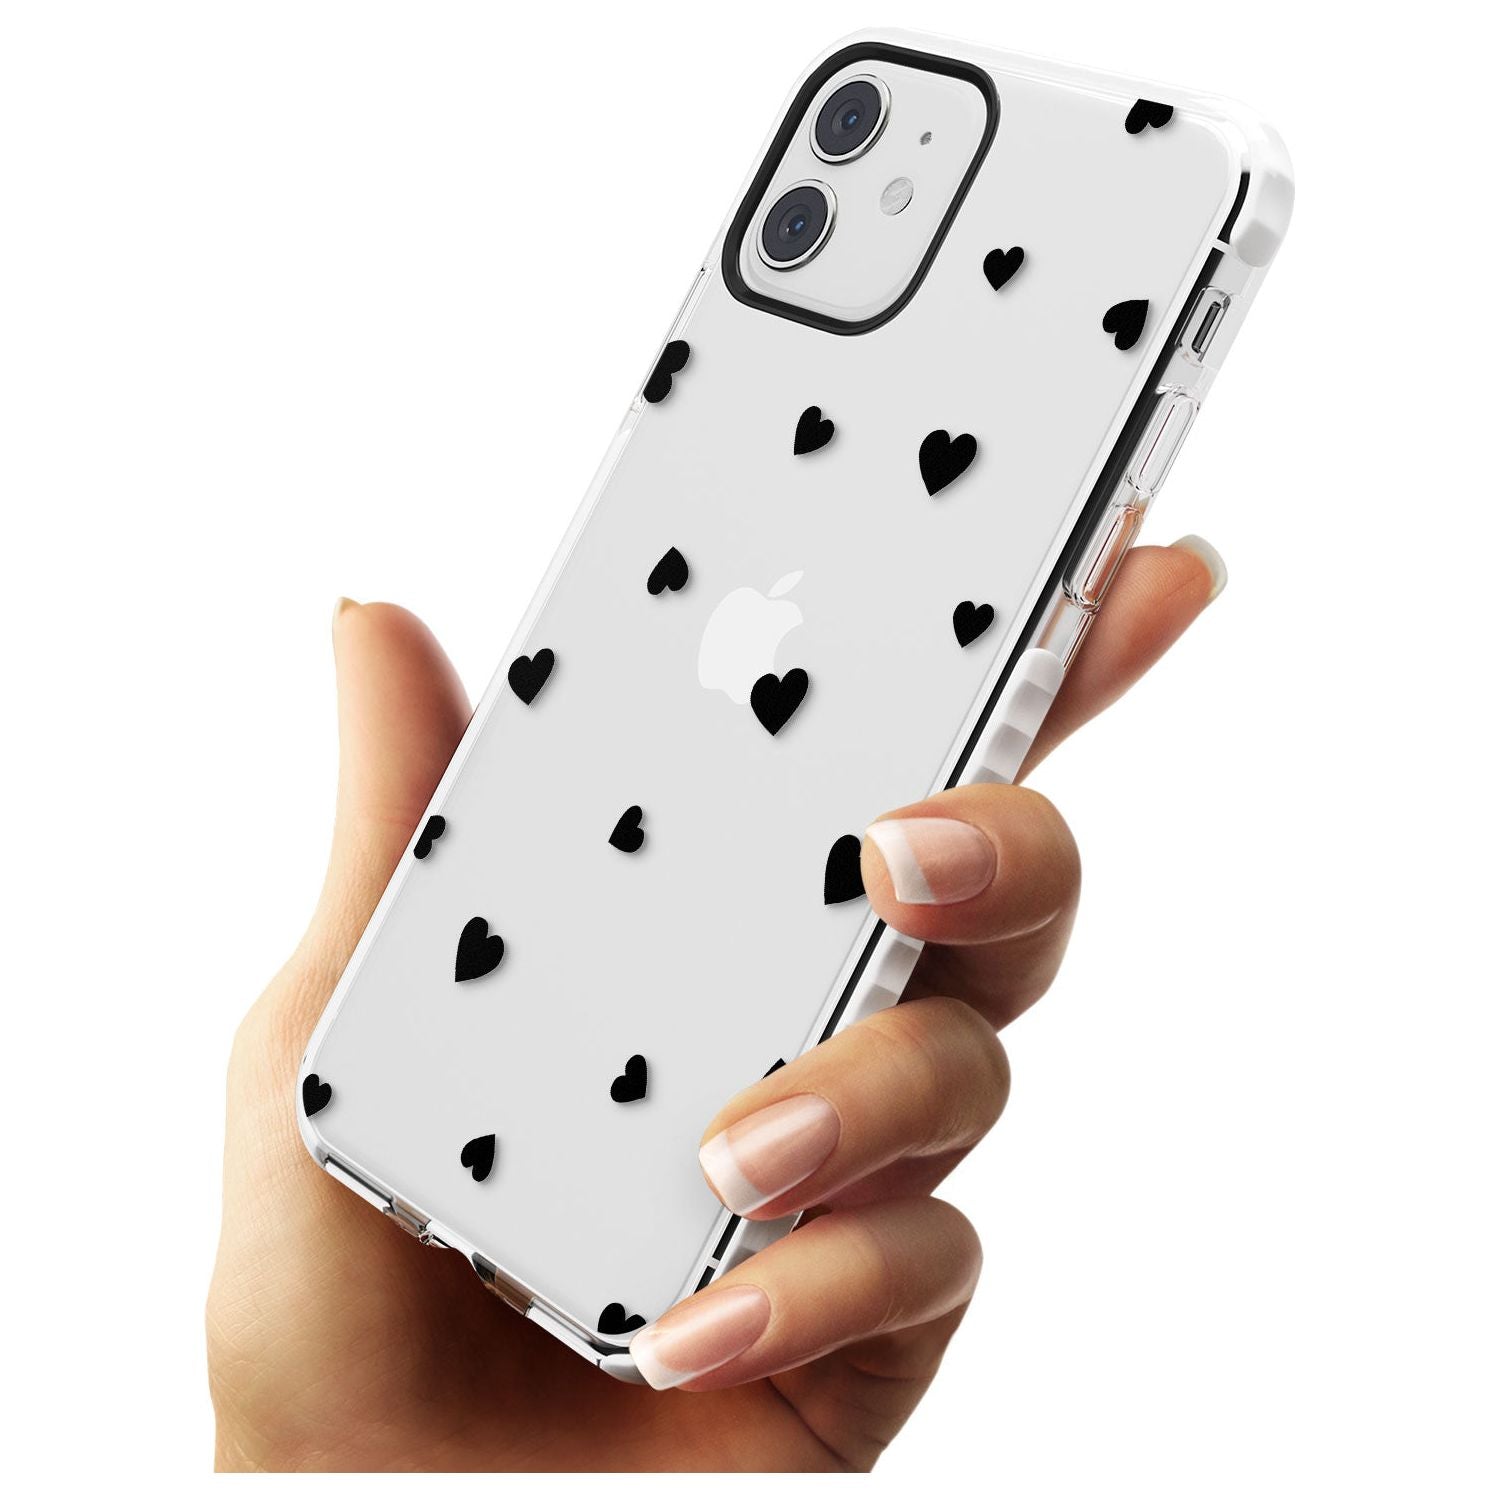 Black Hearts Pattern Impact Phone Case for iPhone 11